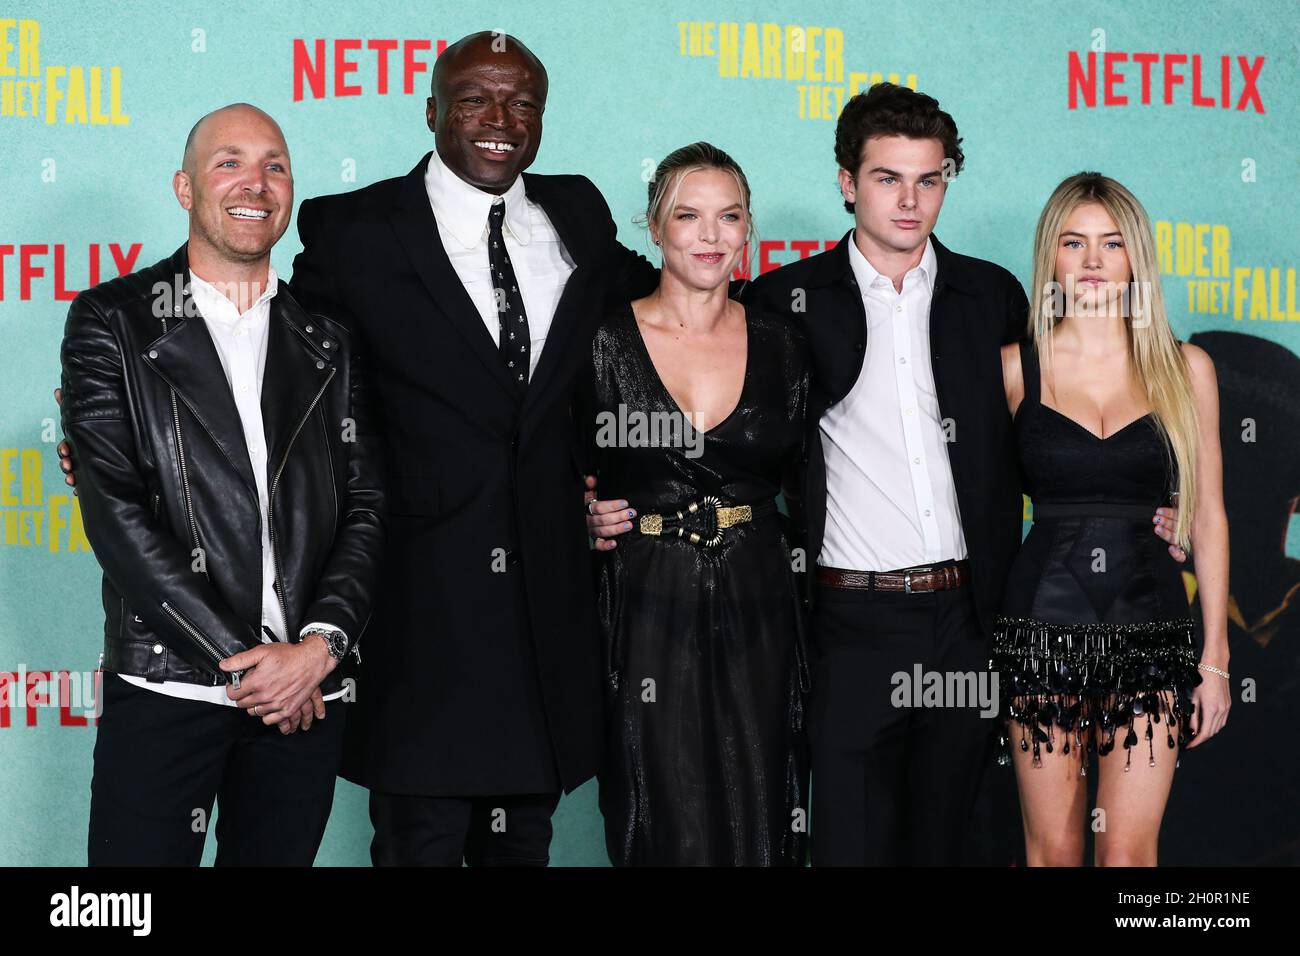 Los Angeles, United States. 13th Oct, 2021. LOS ANGELES, CALIFORNIA, USA - OCTOBER 13: Singer-songwriter Seal (Henry Olusegun Adeola Samuel), girlfriend Laura Strayer, Aris Rachevsky and model Leni Olumi Klum arrive at the Los Angeles Premiere Of Netflix's 'The Harder They Fall' held at the Shrine Auditorium and Expo Hall on October 13, 2021 in Los Angeles, California, United States. (Photo by Xavier Collin/Image Press Agency) Credit: Image Press Agency/Alamy Live News Stock Photo